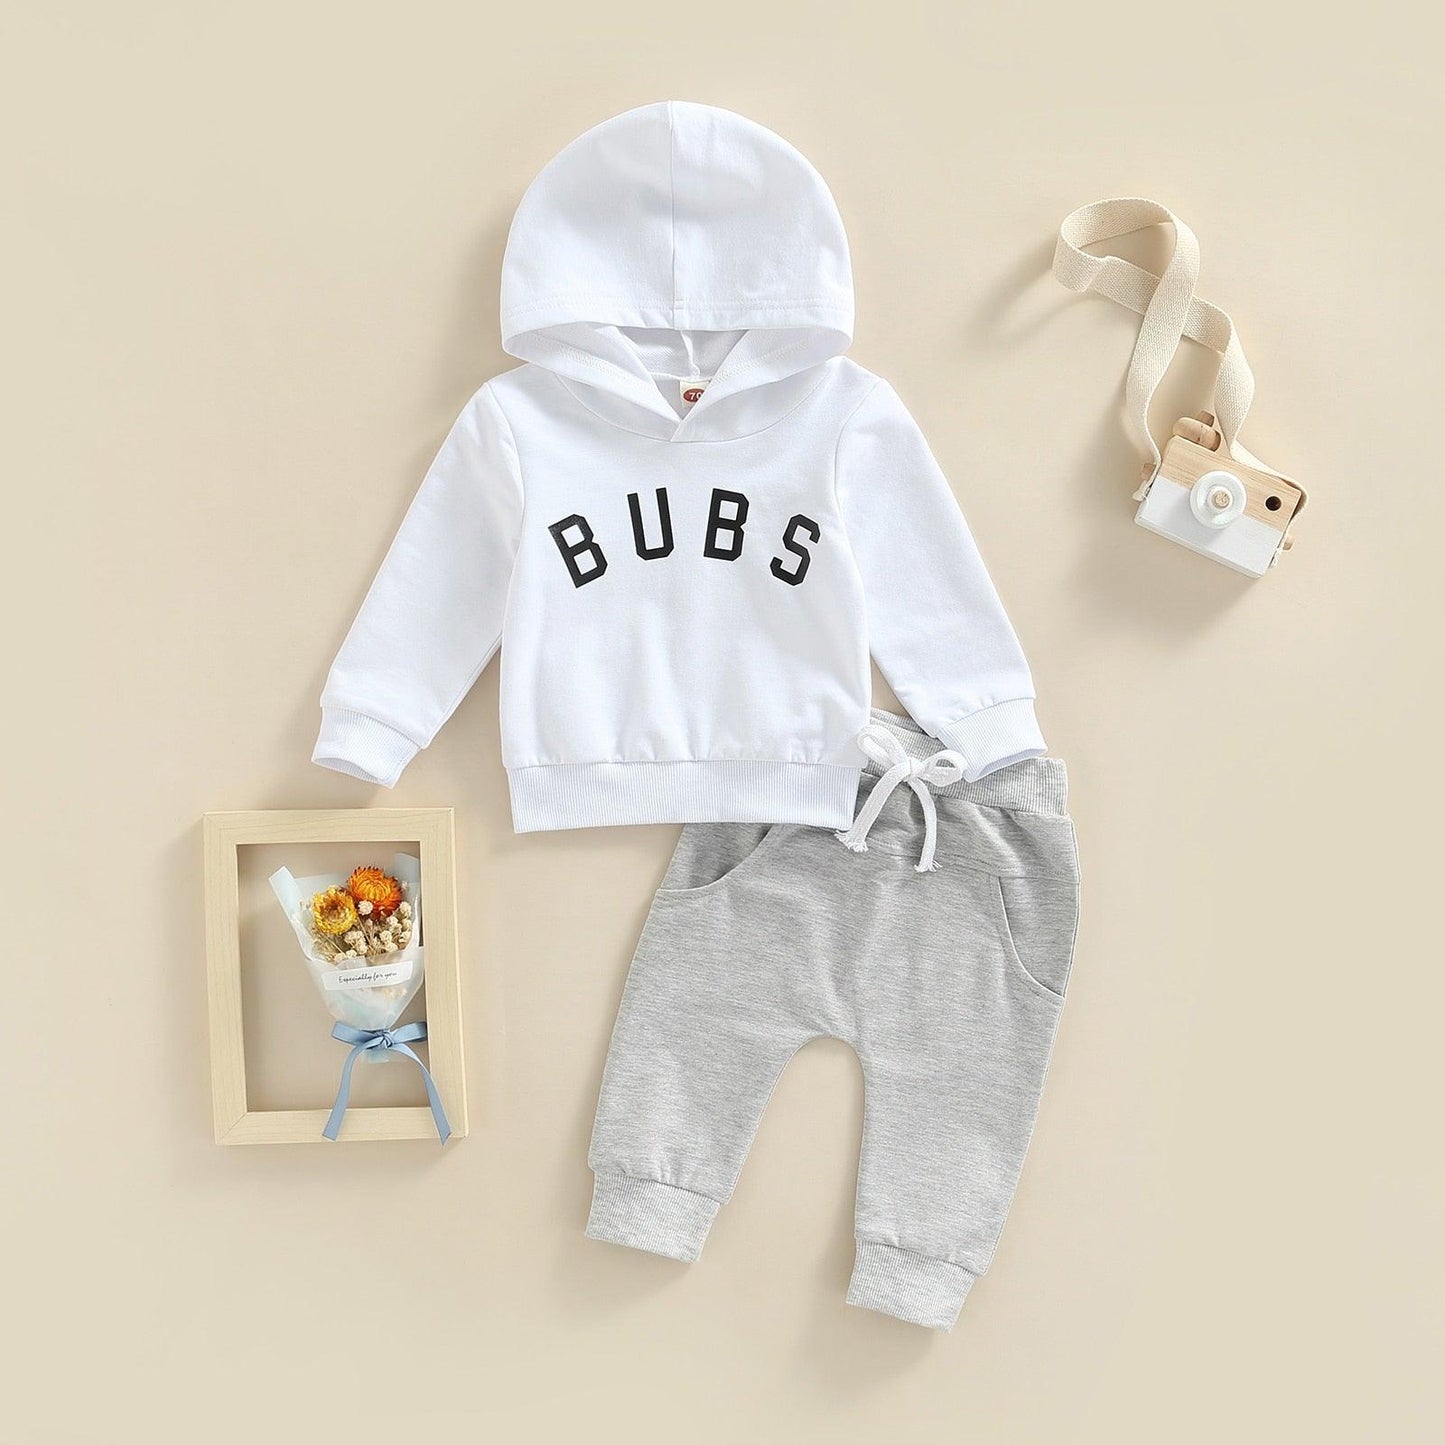 Bubs Hoodie and Jogger Outfit - Shop Baby Boutiques 